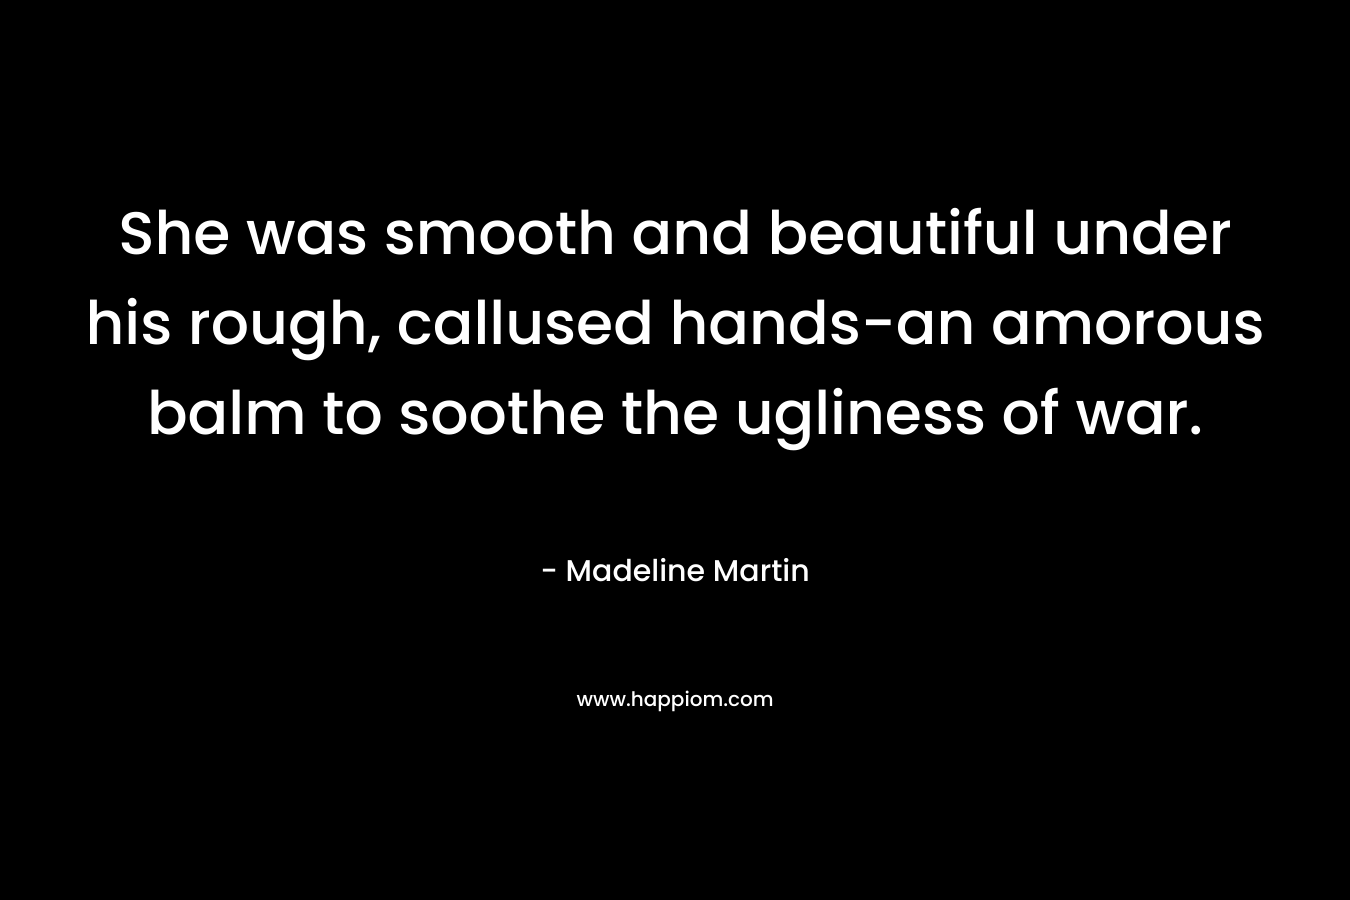 She was smooth and beautiful under his rough, callused hands-an amorous balm to soothe the ugliness of war. – Madeline  Martin